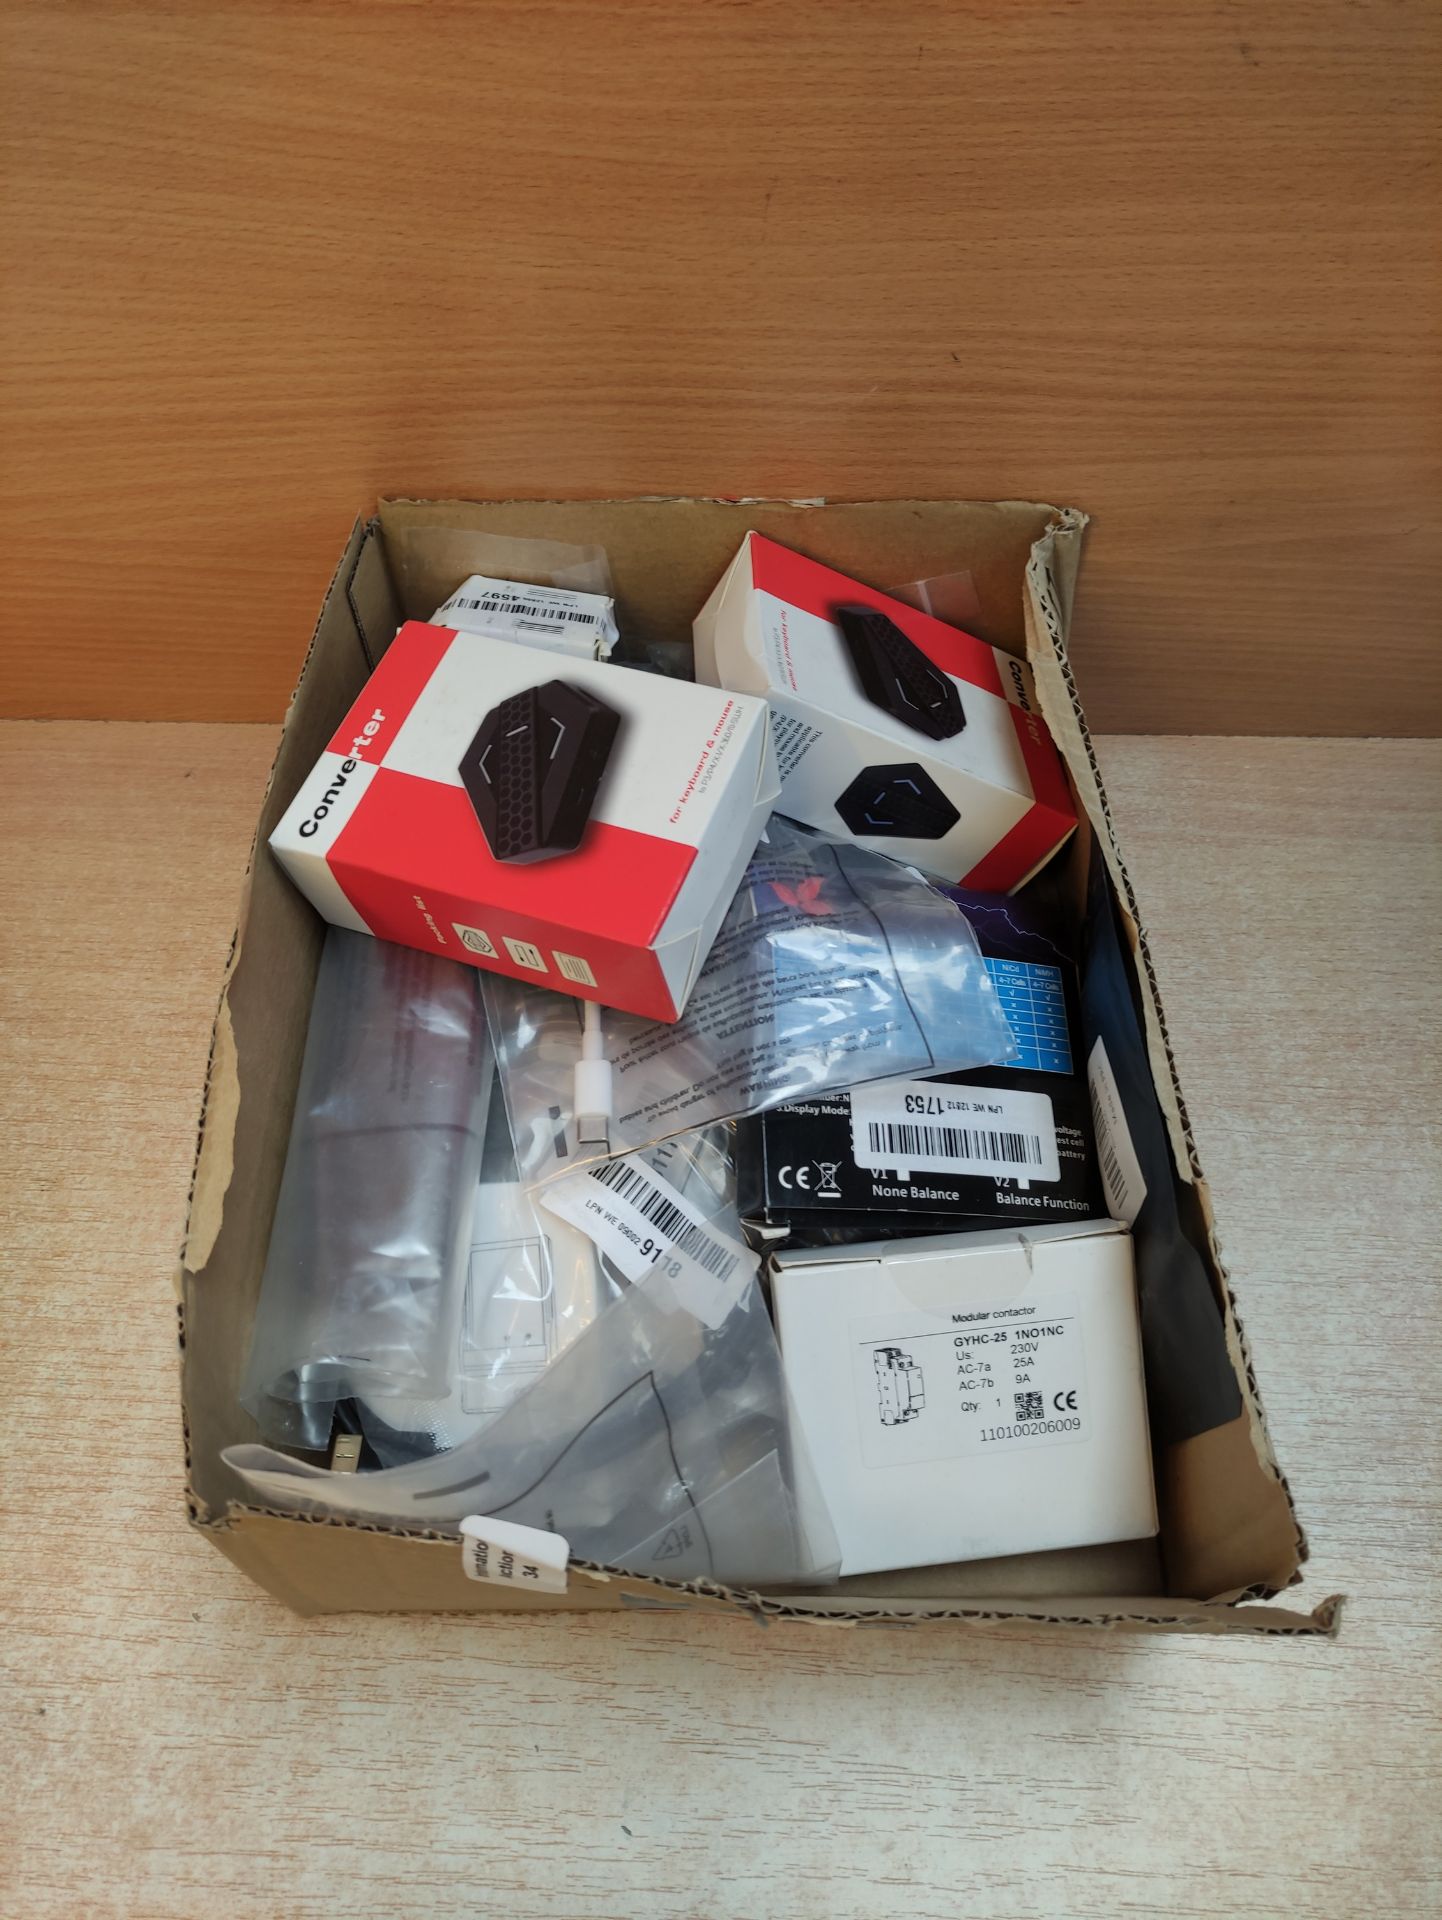 RRP £203.16 Total, Lot Consisting of 20 Items - See Description. - Image 2 of 19